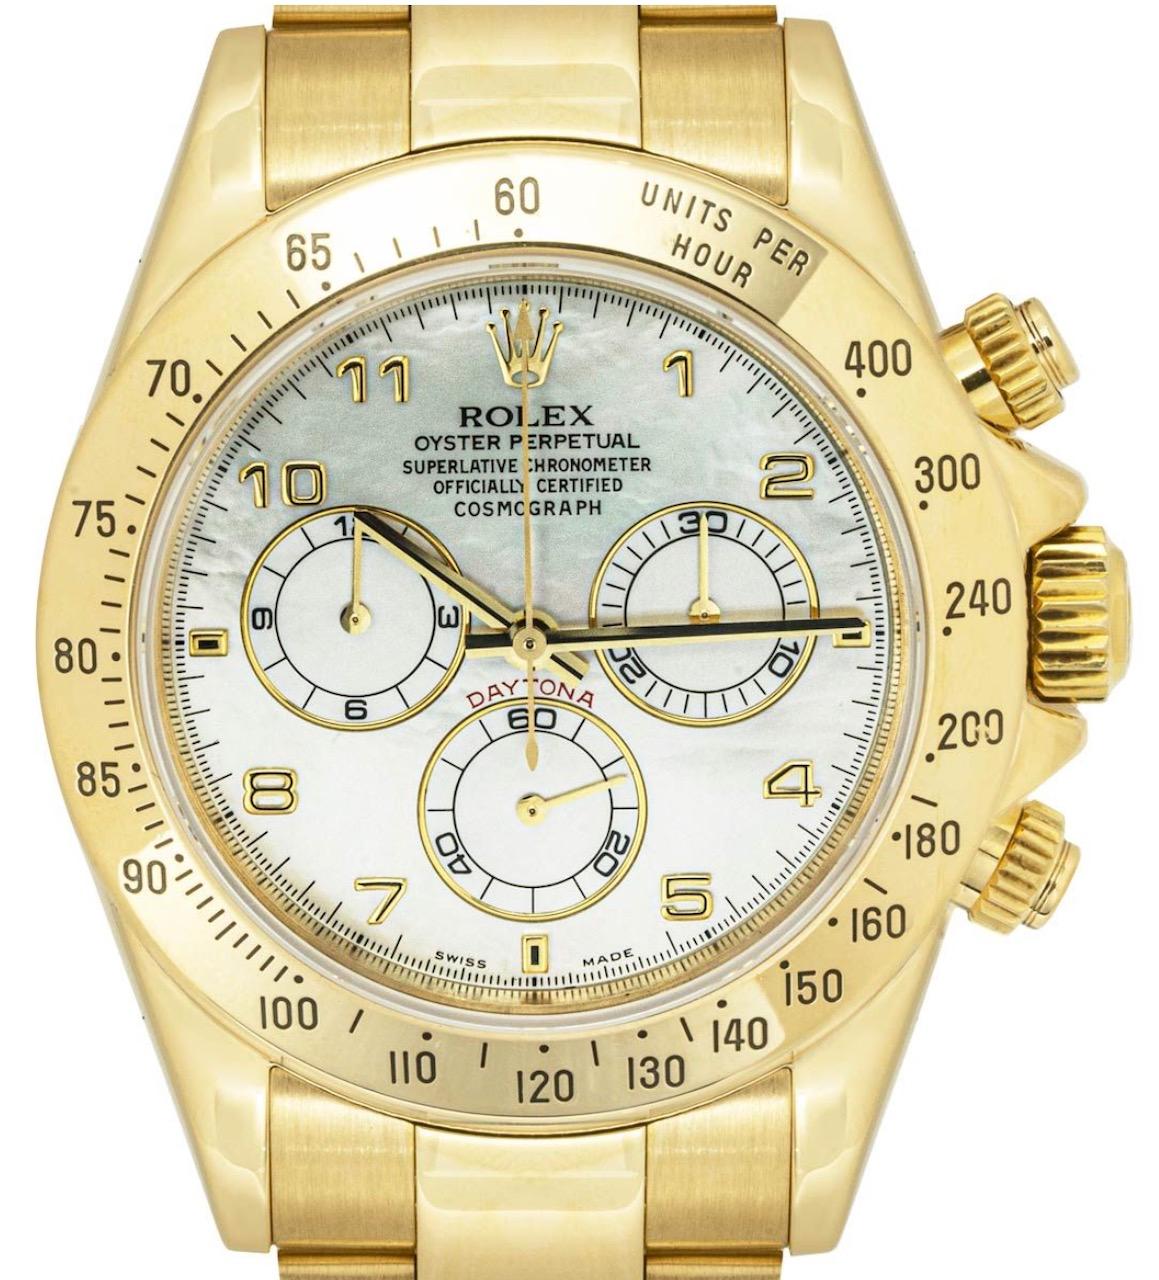 An 18k yellow gold Cosmograph Daytona wristwatch by Rolex. Features a striking mother of pearl dial with applied arabic house markers, a 30 minute recorder, a small seconds, a 12-hour recorder and a yellow gold bezel with an engraved